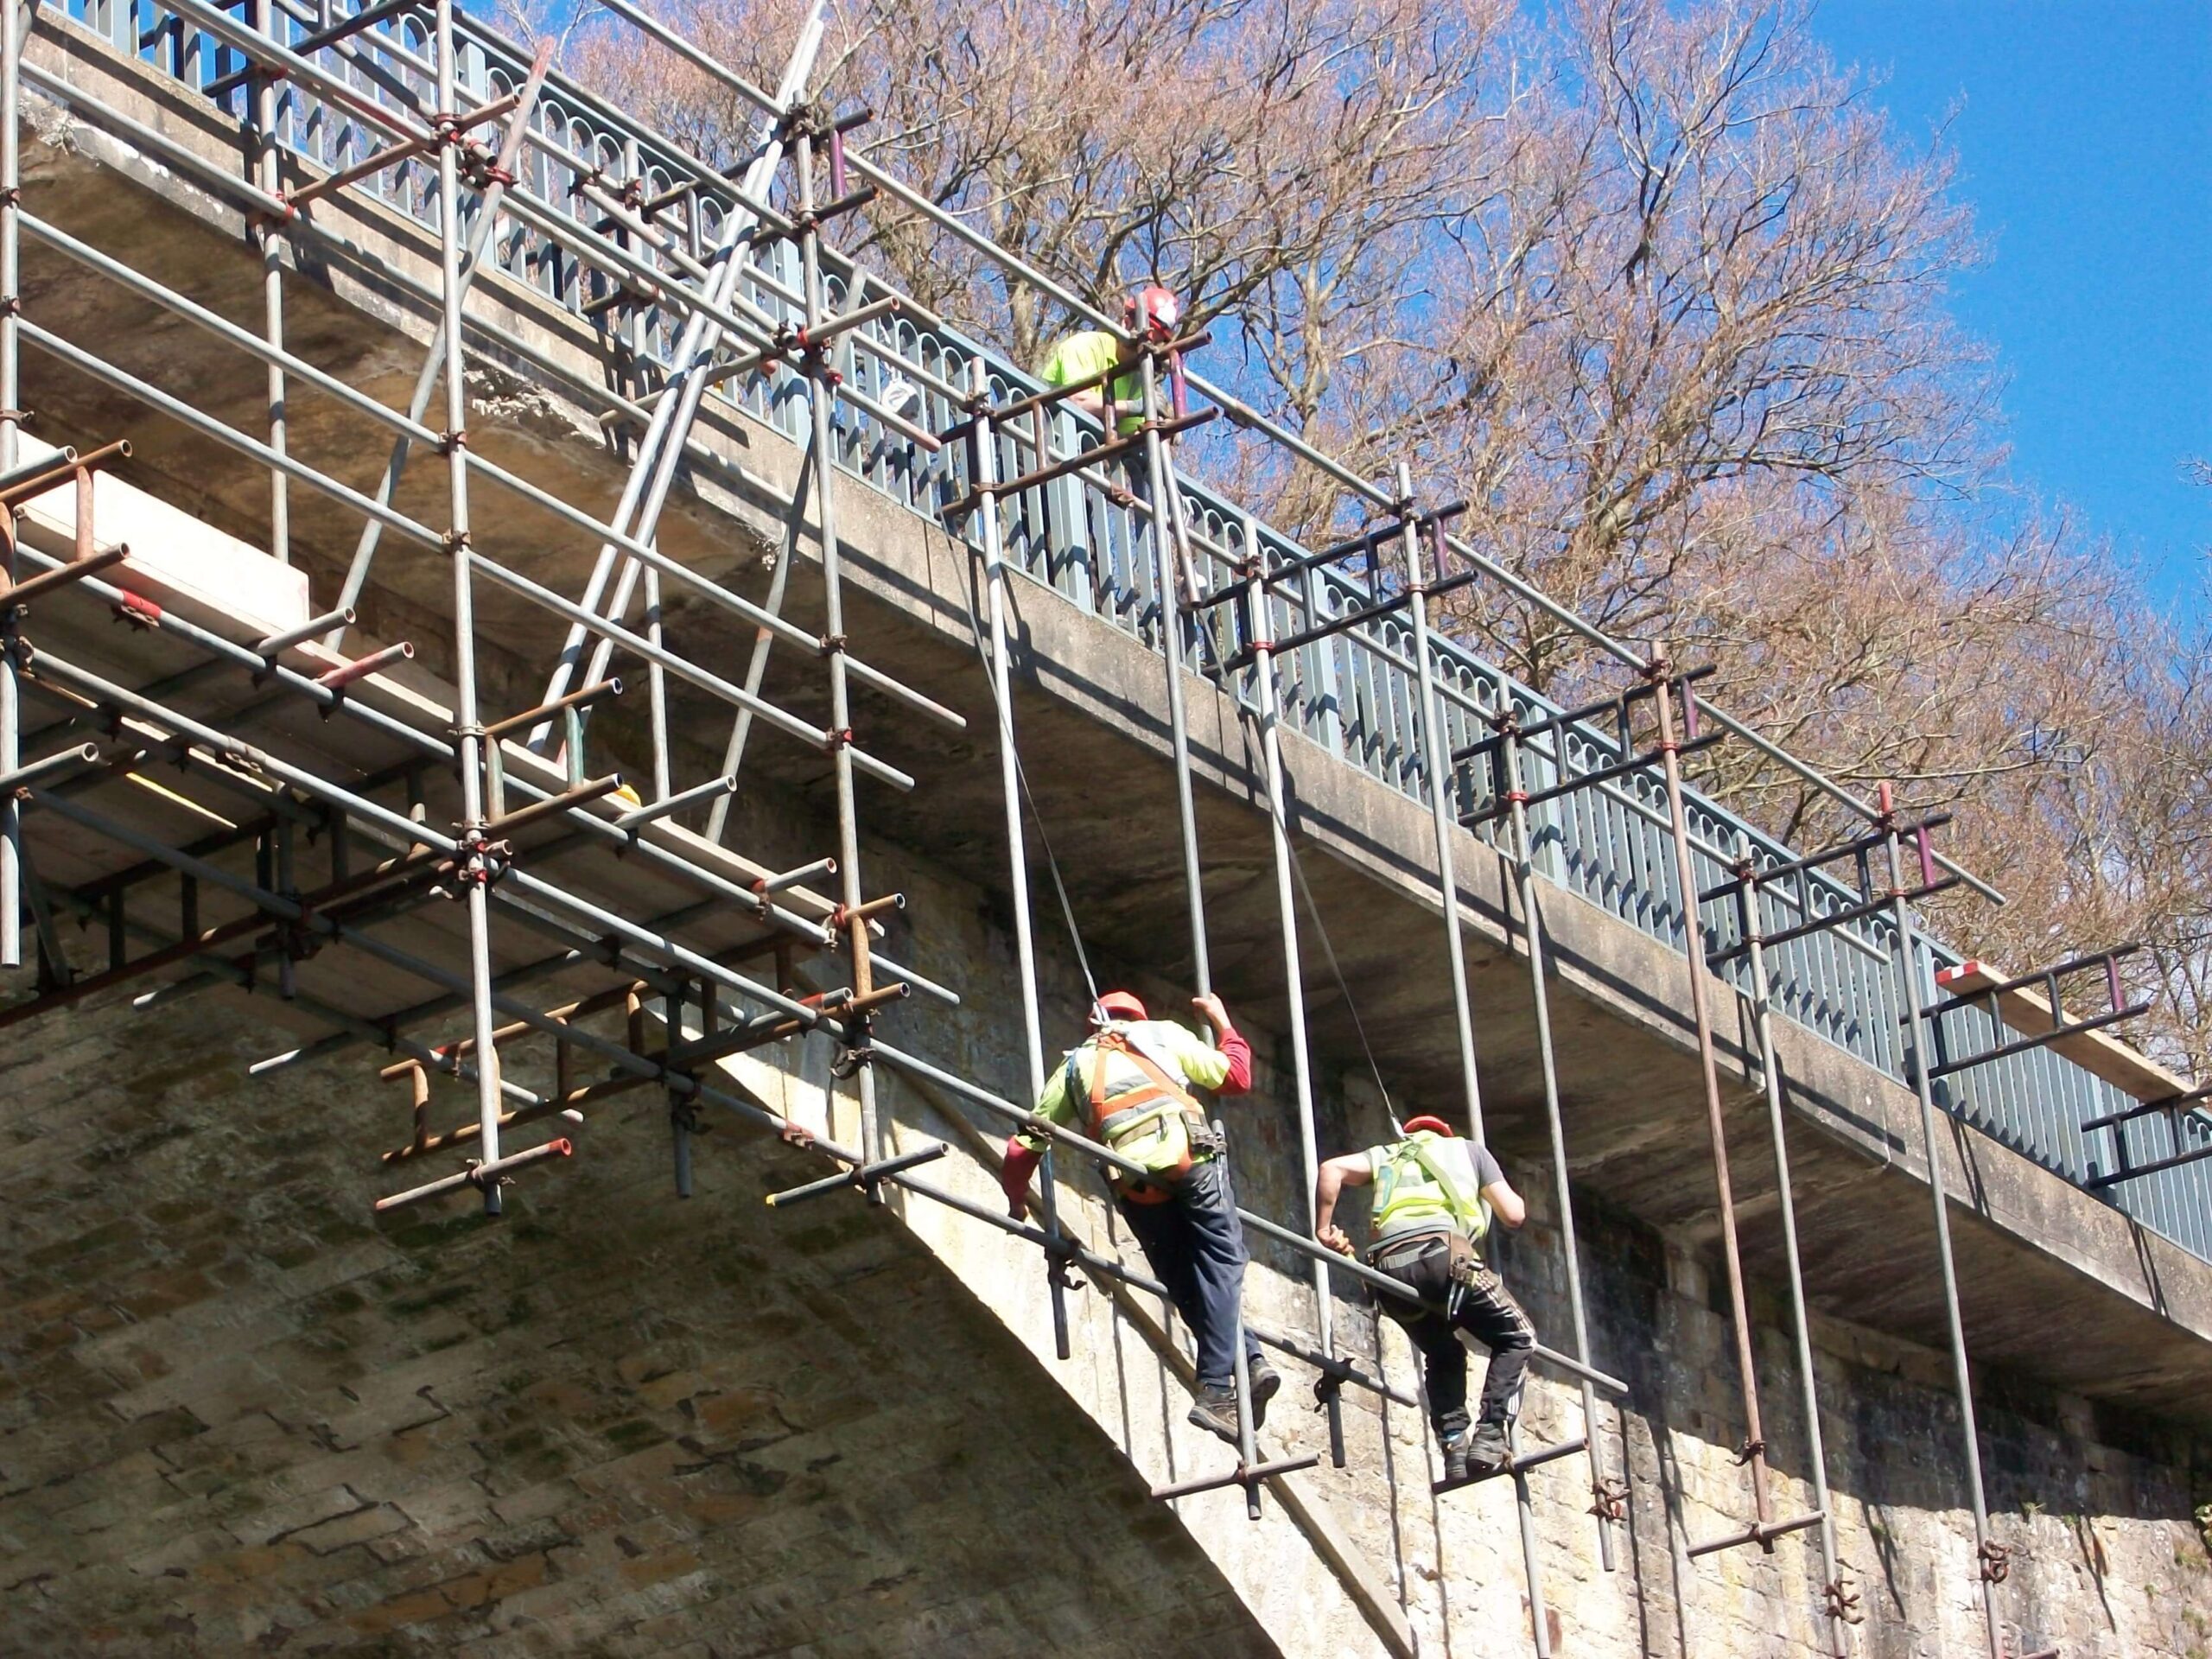 Things to note when erecting mobile scaffolding include